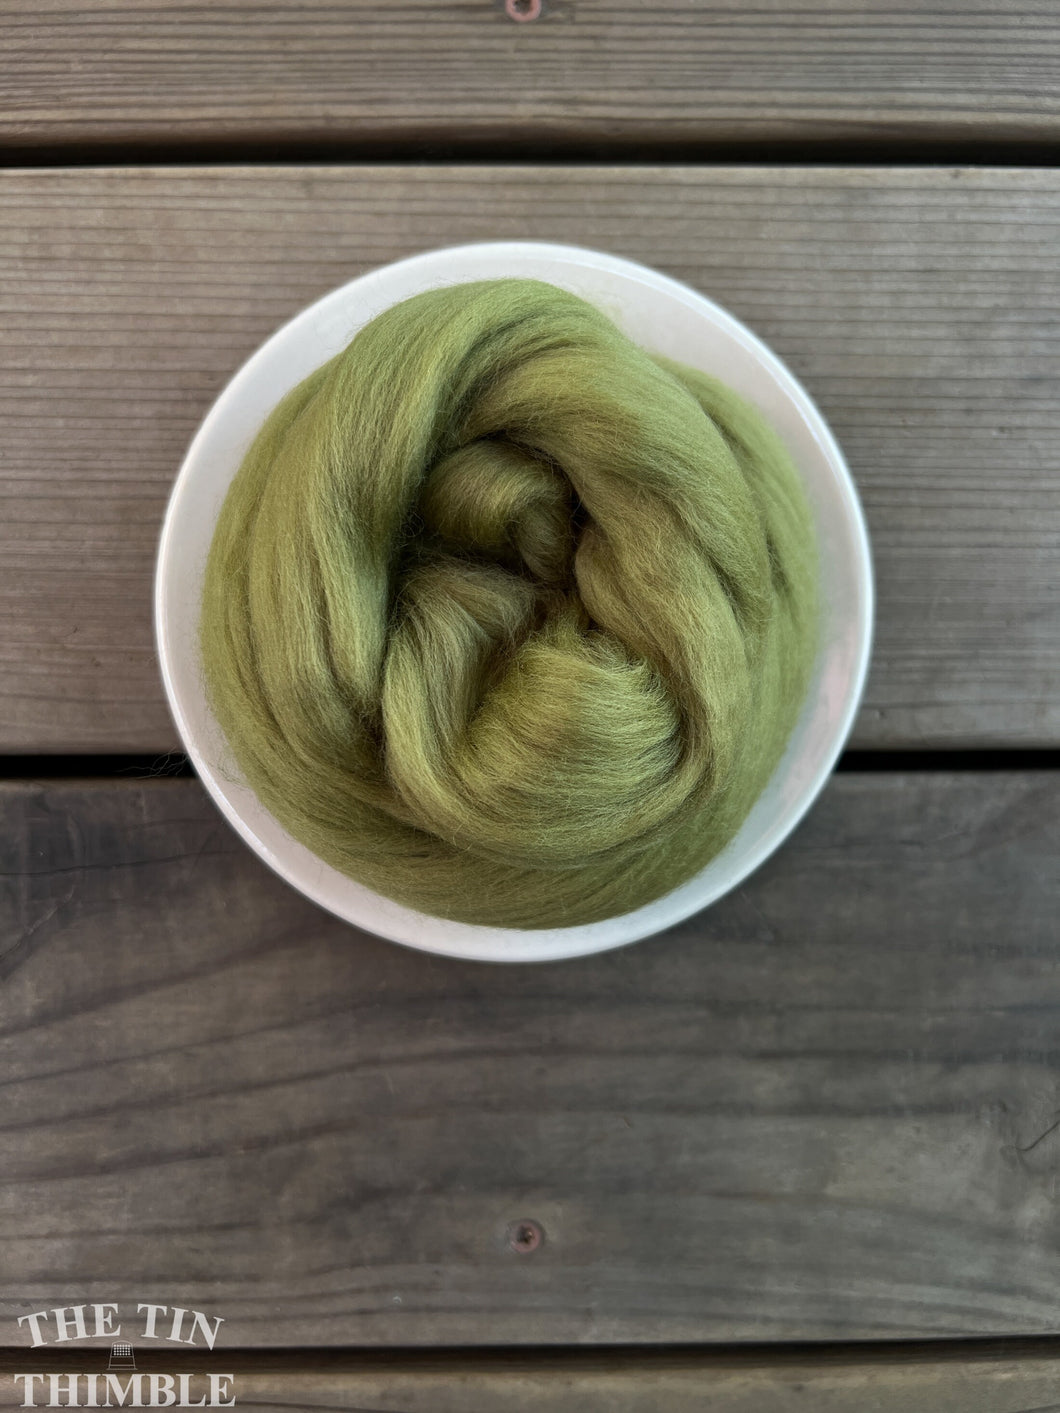 Asparagus Green Superfine Merino Wool Roving - 1 oz - Superfine Roving for Felting, Weaving, Spinning and More